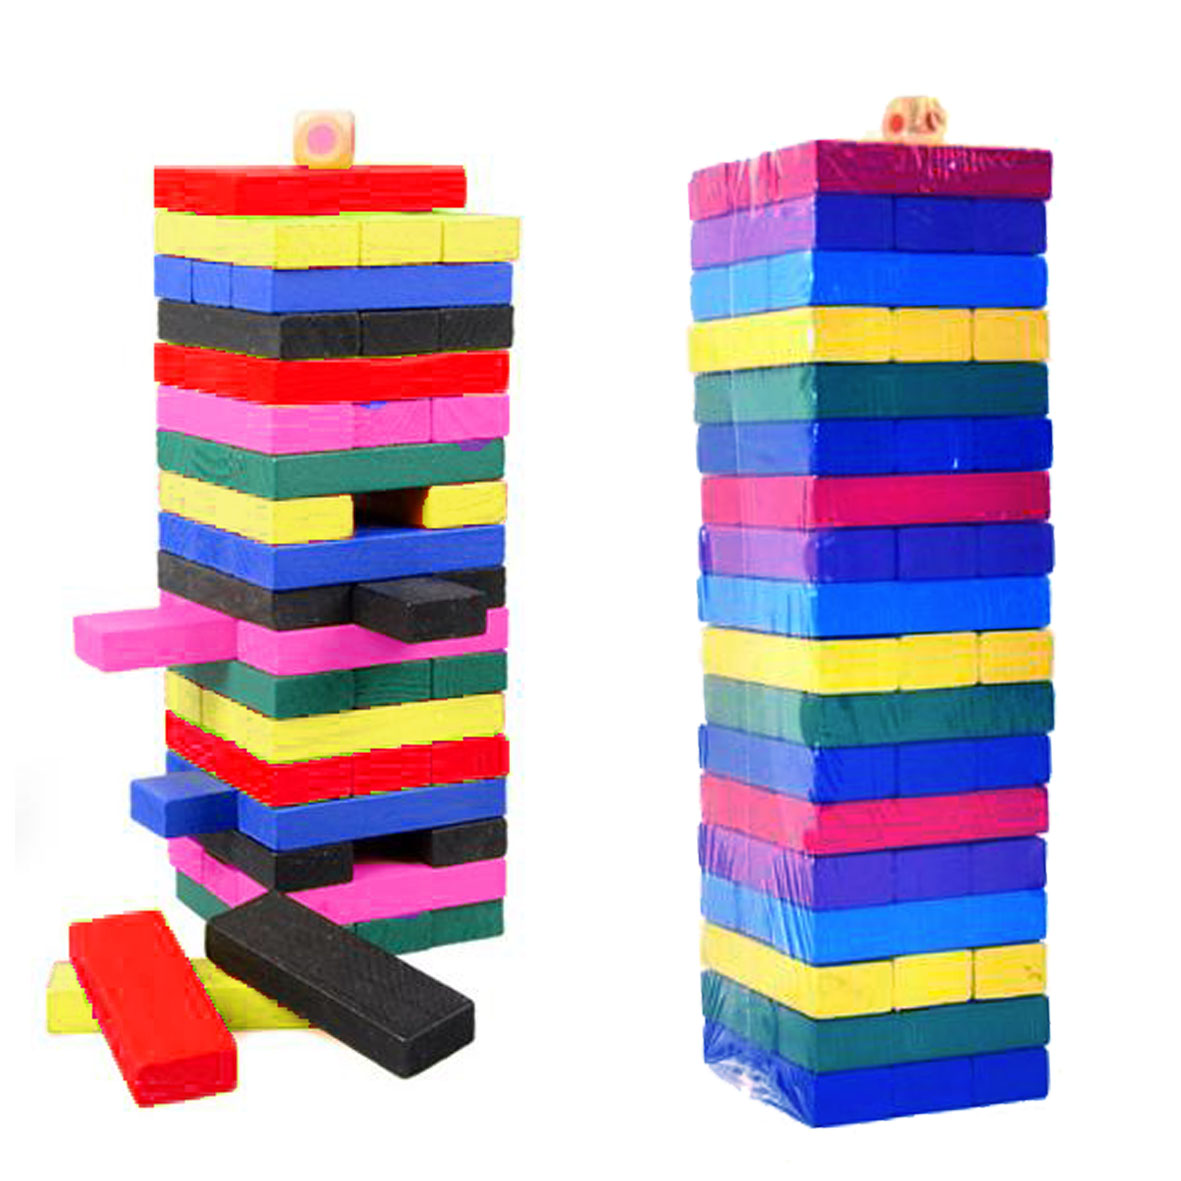 GL-AAA1148 54 PCS Colorful Wooden Stacking Block for Children